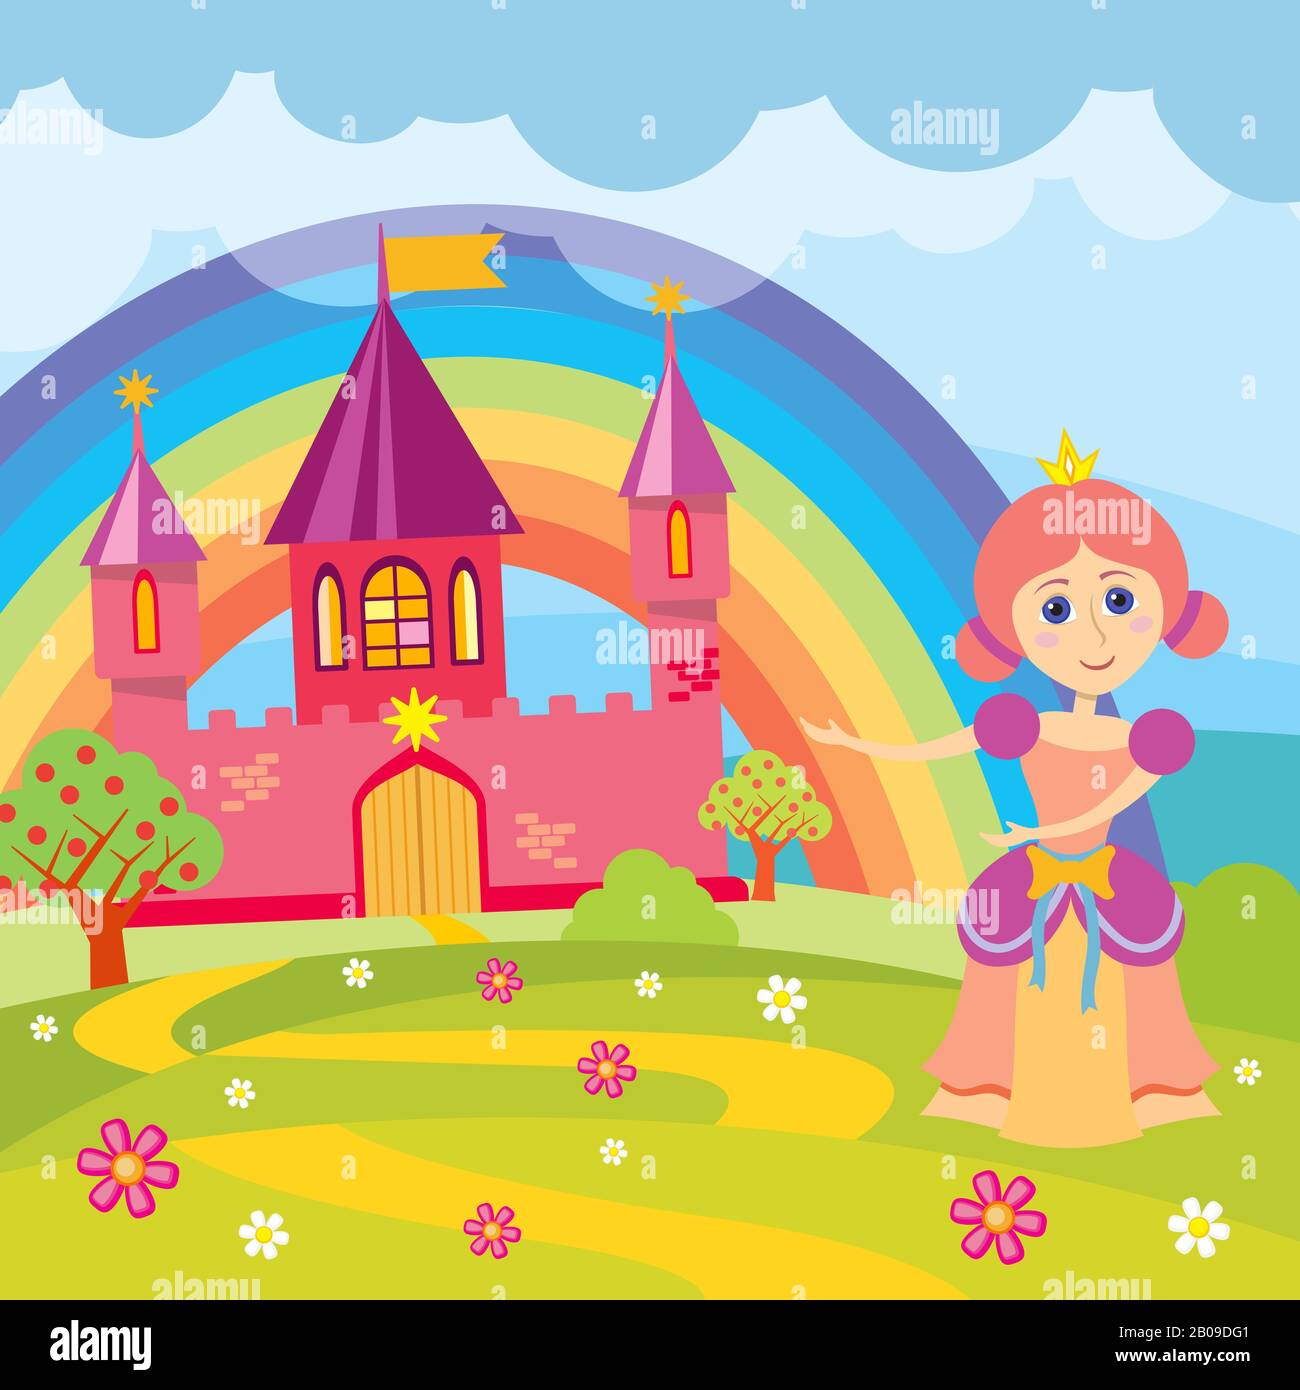 Cartoon princess and fairytale castle with landscape vector illustration. Fairytale kingdom with architecture drawing medieval castle Stock Vector